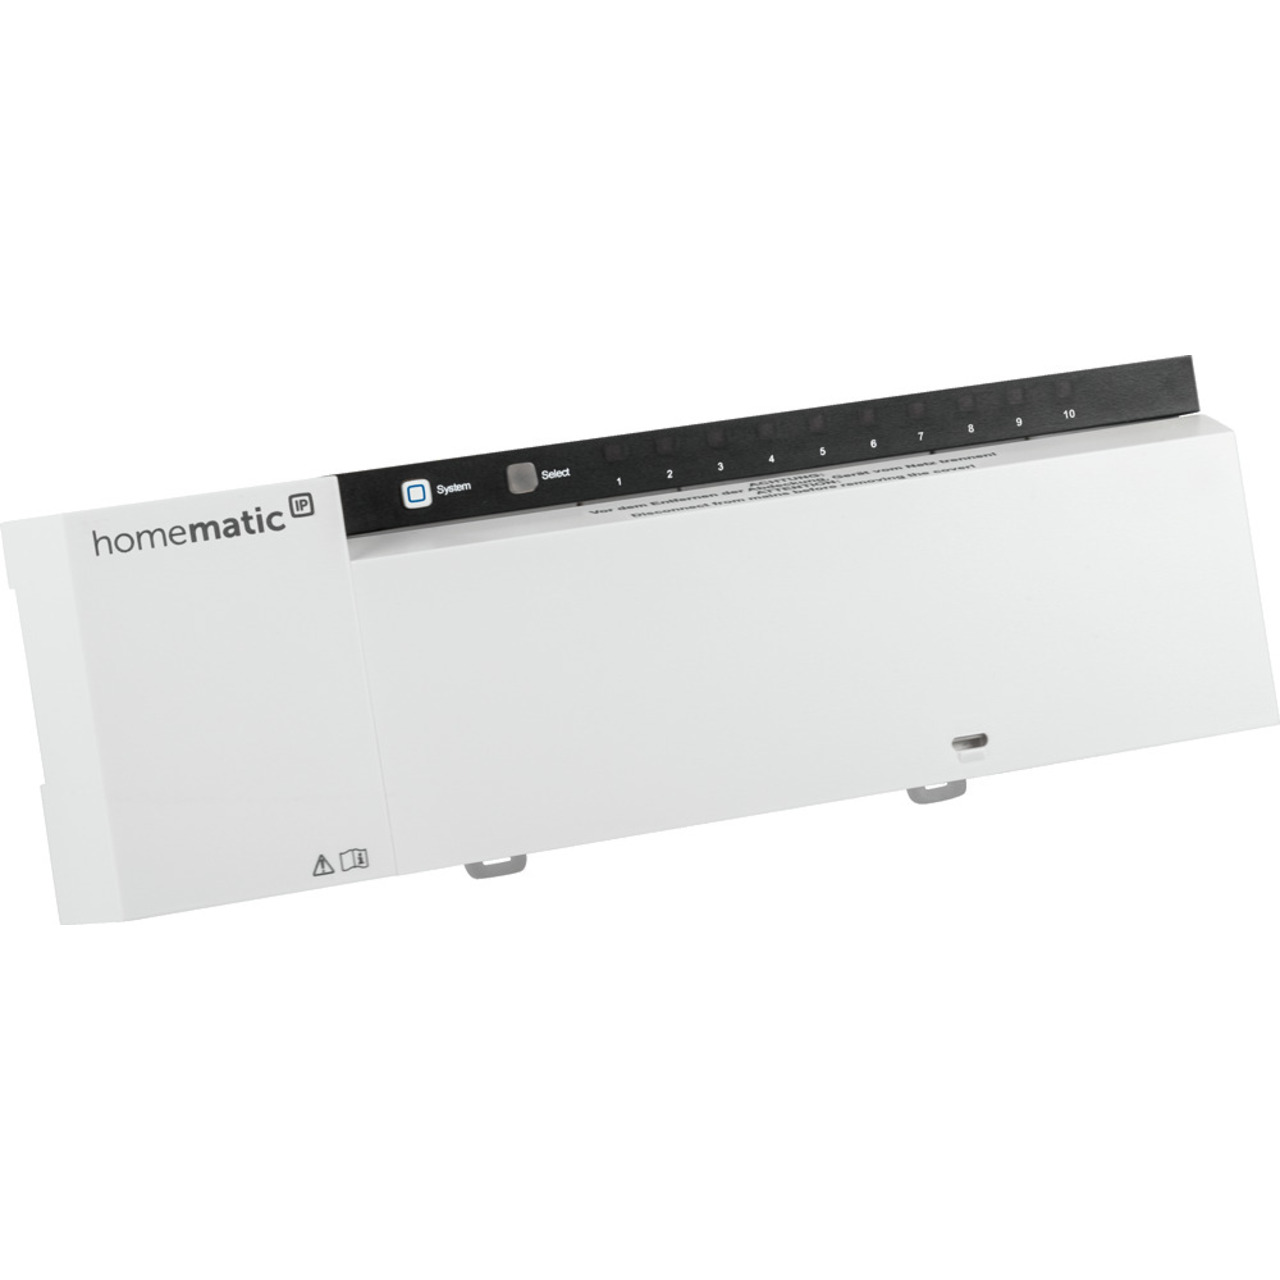 Homematic IP Wired Smart Home Fussbodenheizungscontroller HmIPW-FAL230-C10  10-fach- 230 V unter Hausautomation